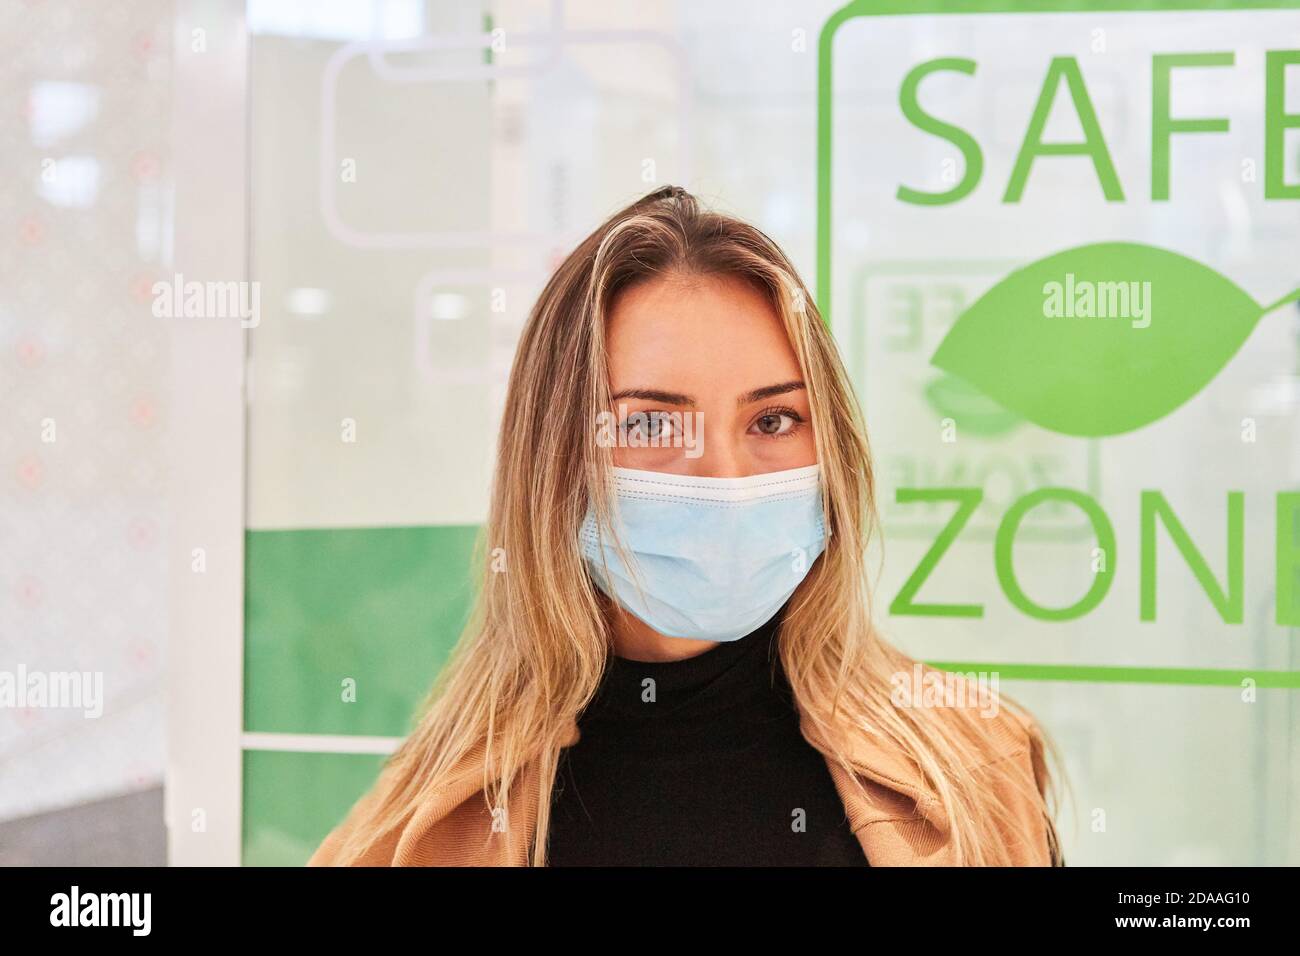 Young woman passerby with face mask because of Covid-19 pandemic while shopping Stock Photo